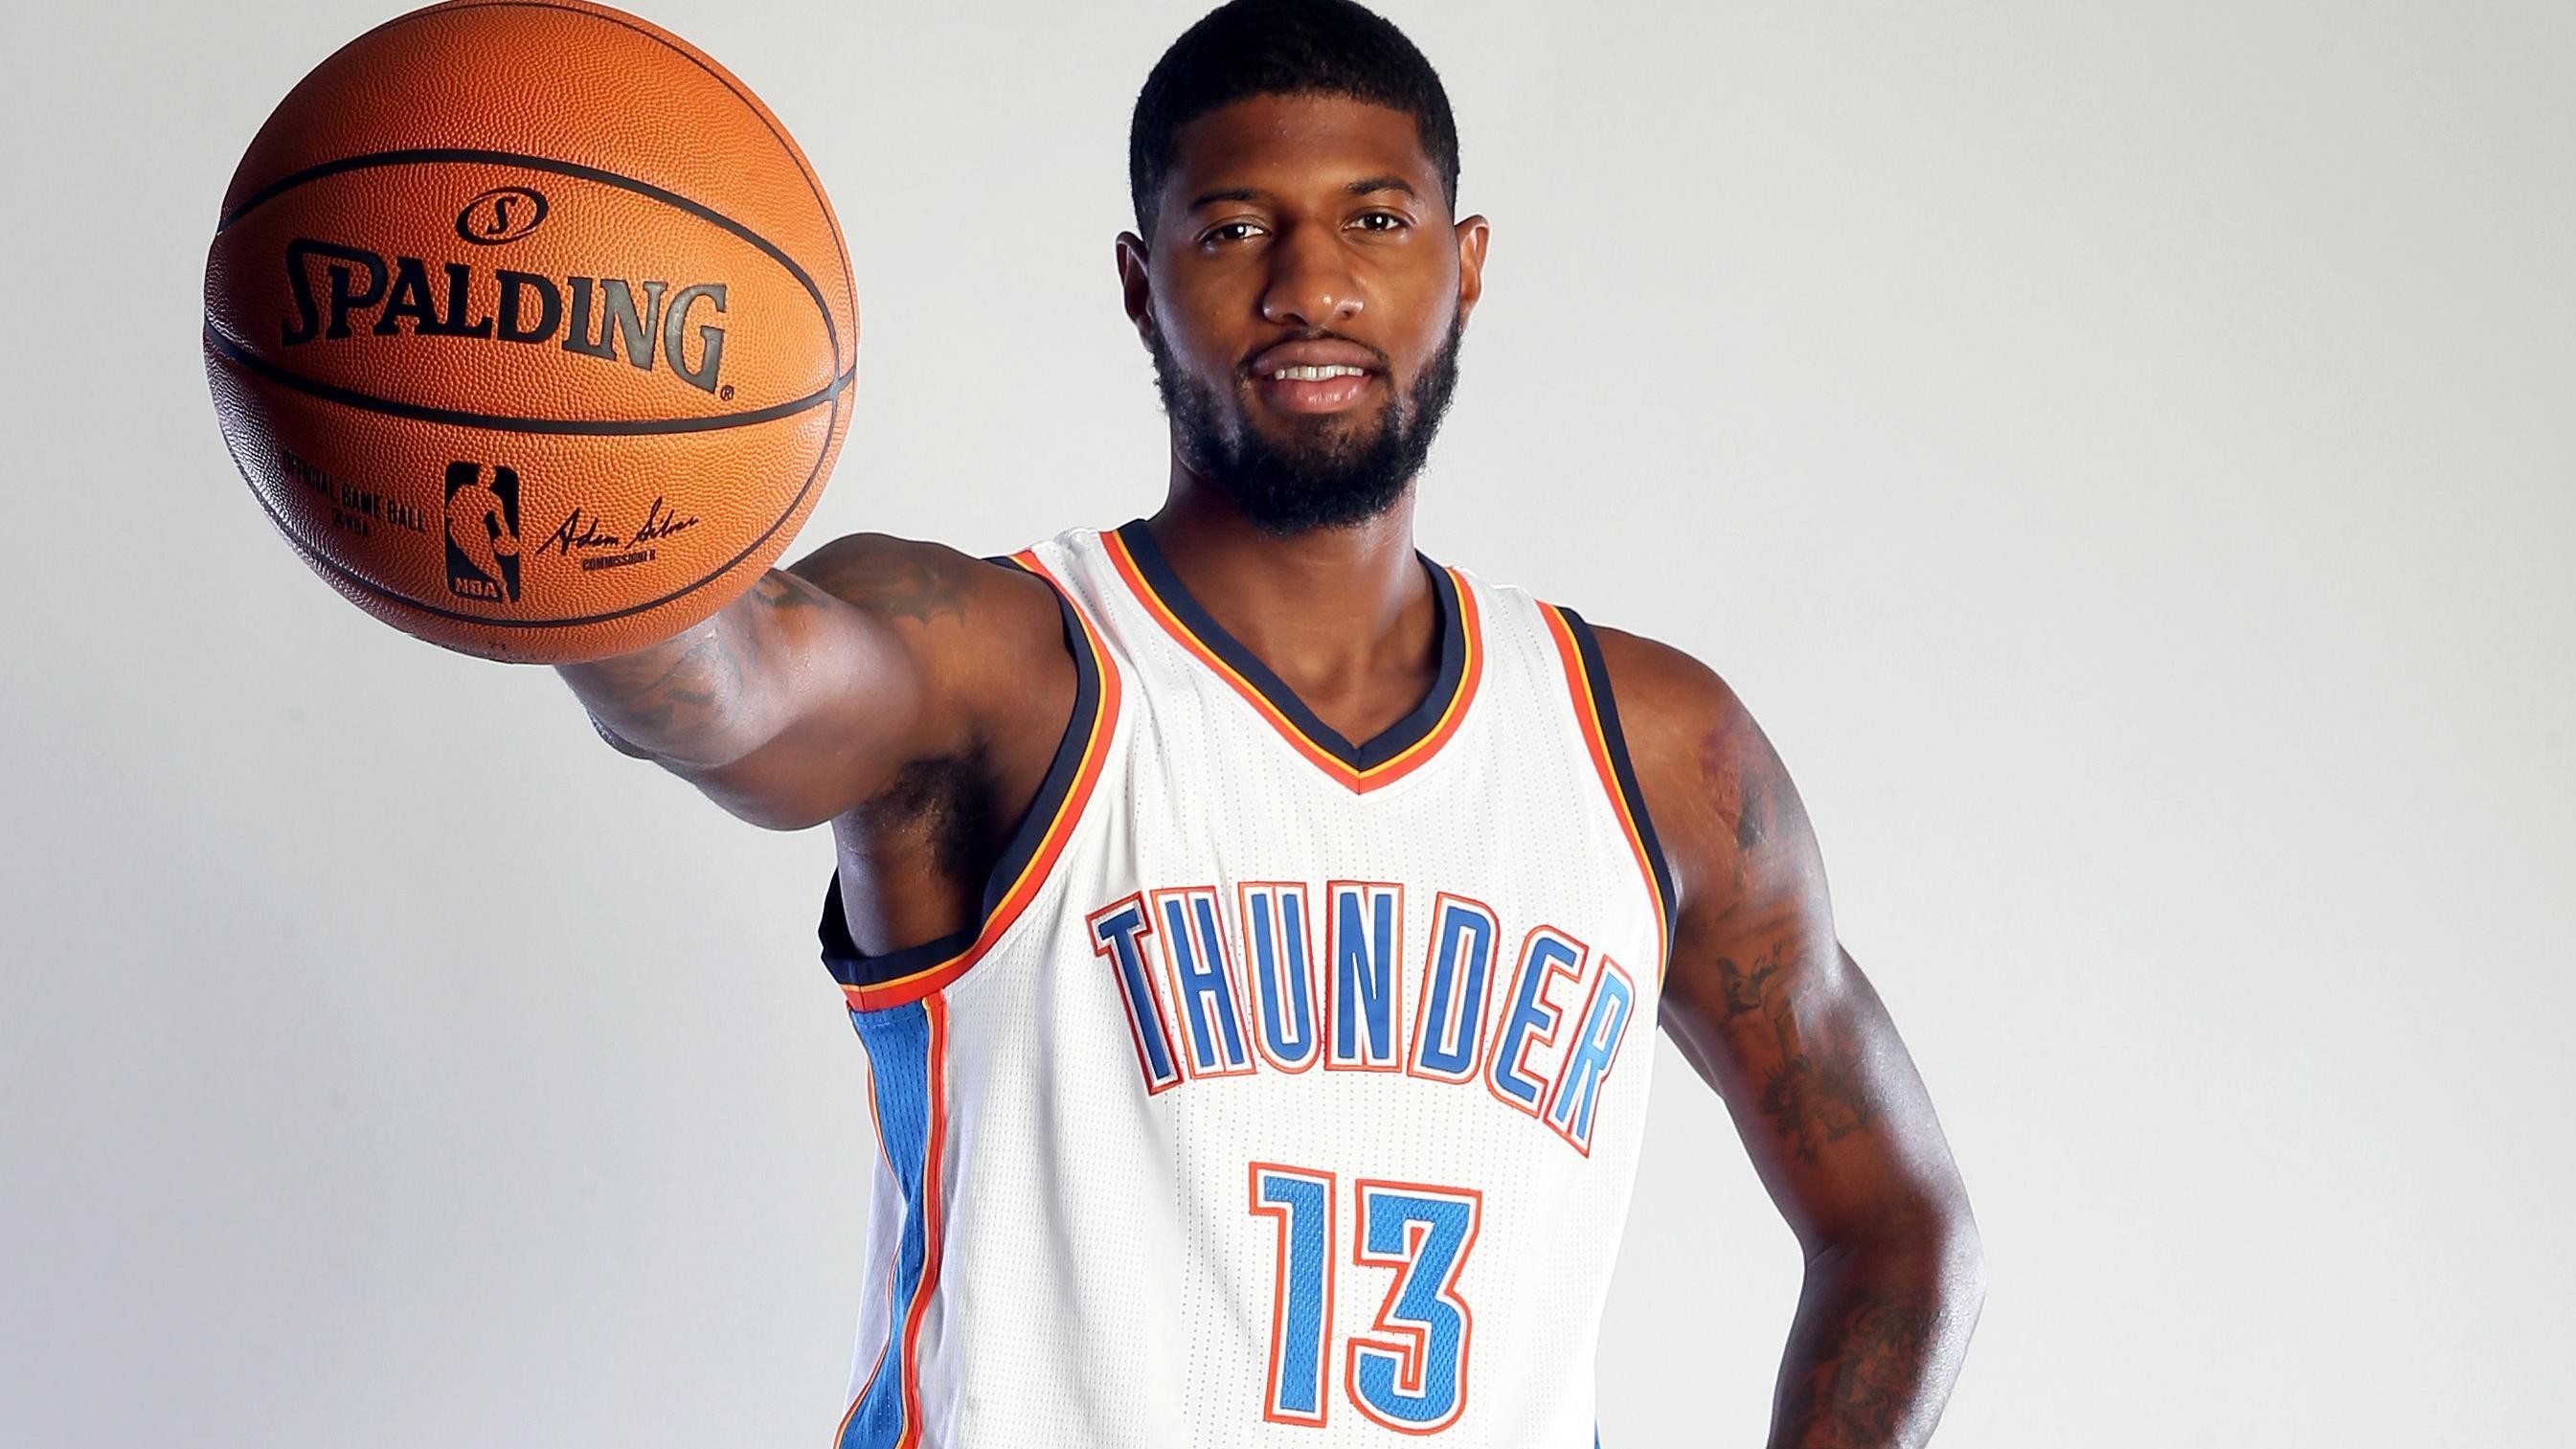 2690x1513 Image result for paul george thunder photoshoot